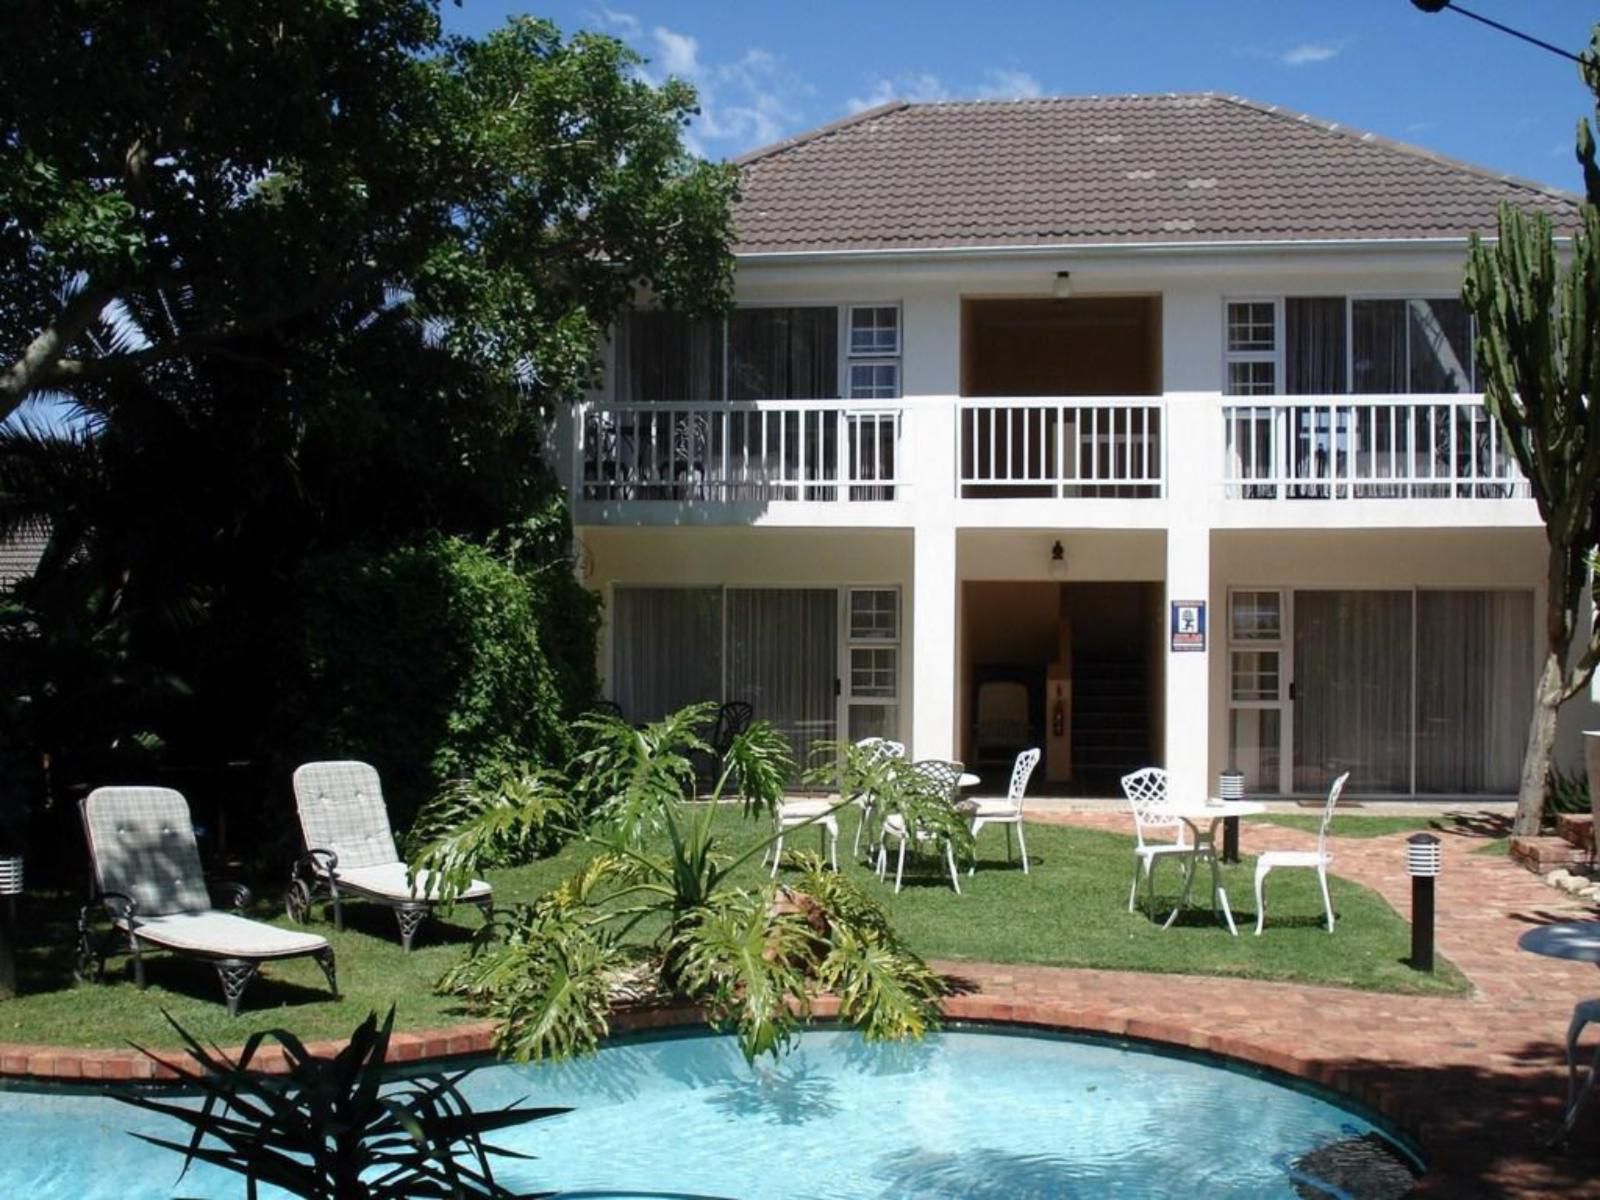 Africa Beach Bed And Breakfast Summerstrand Port Elizabeth Eastern Cape South Africa House, Building, Architecture, Palm Tree, Plant, Nature, Wood, Swimming Pool